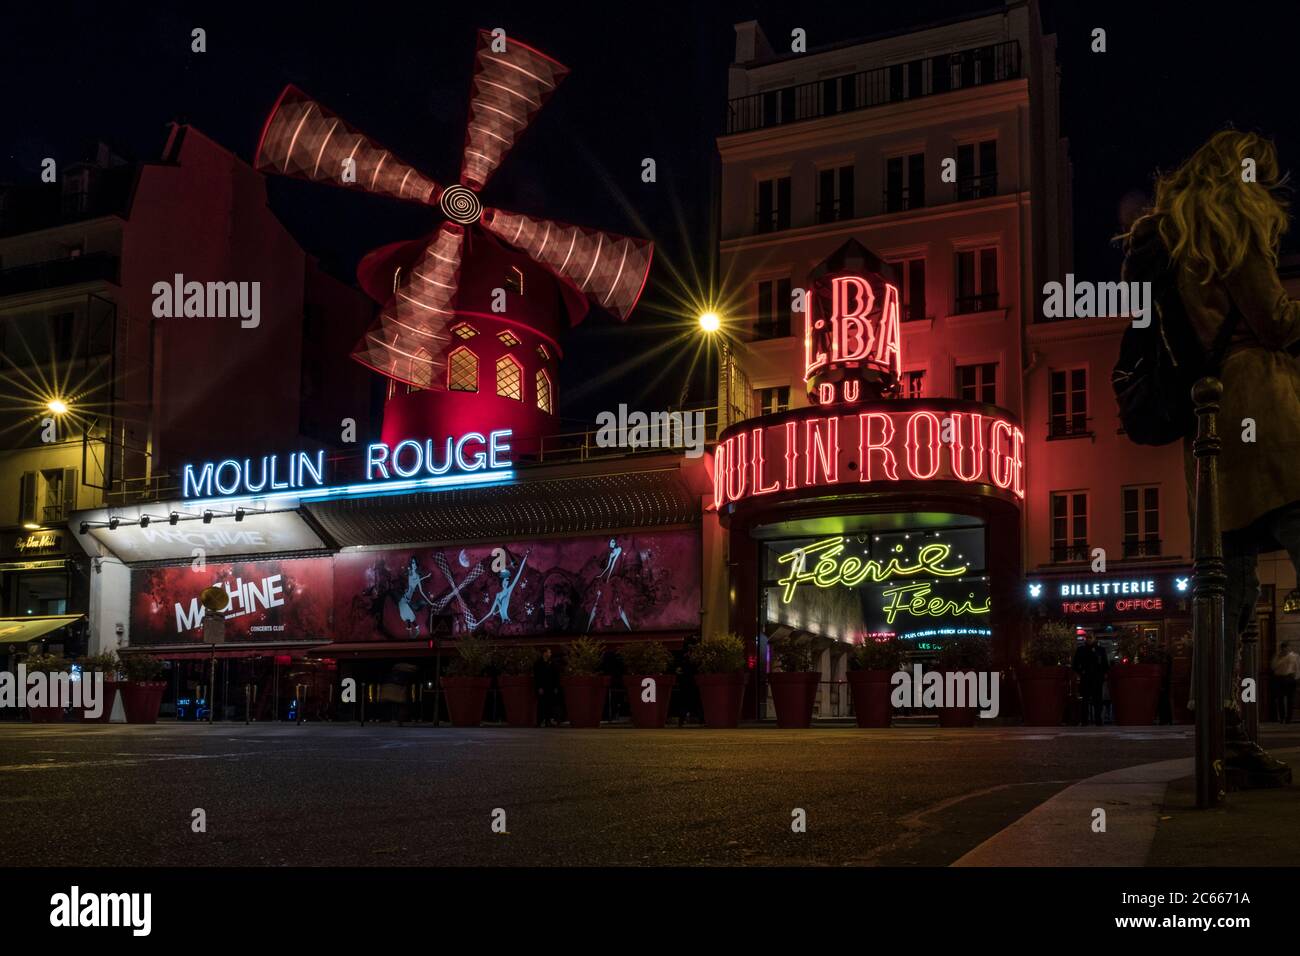 Moulin Rouge, night shot in Paris, France Stock Photo